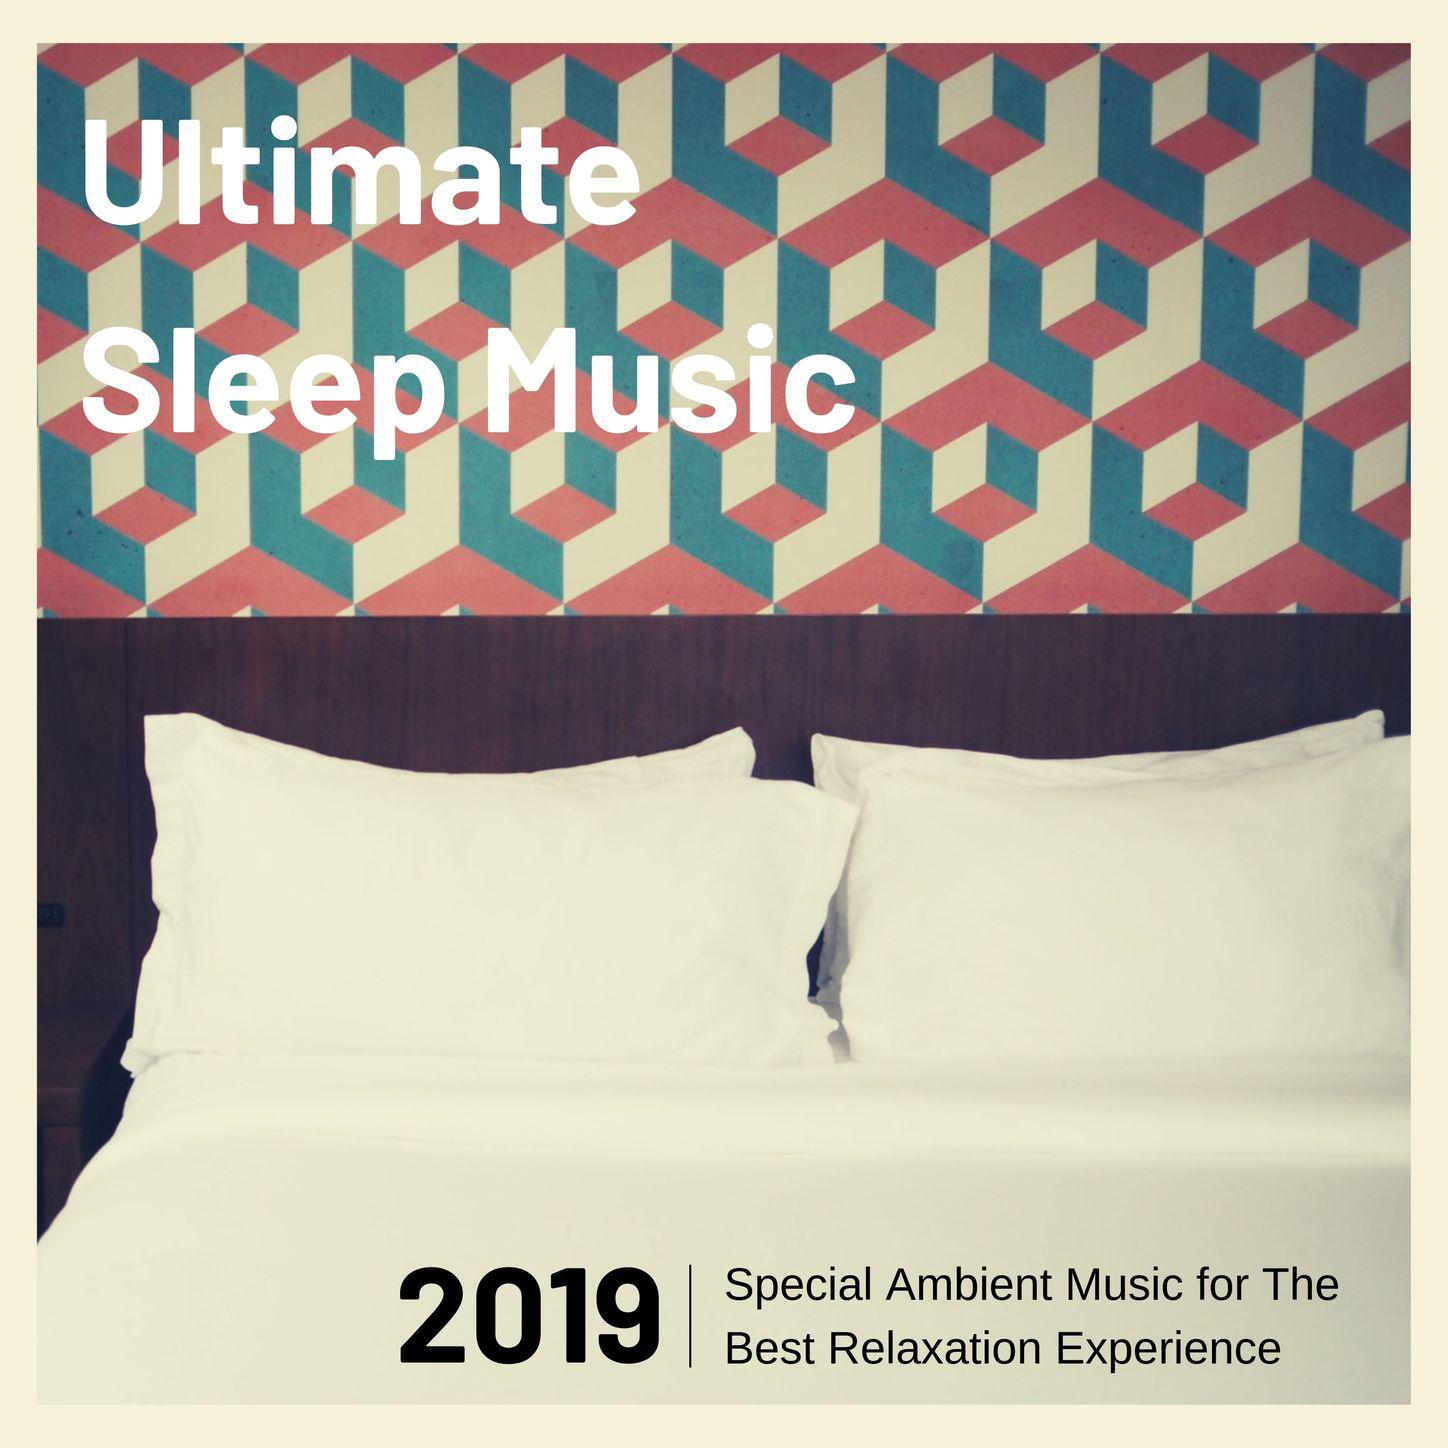 Ultimate Sleep Music 2019 - Special Ambient Music for The Best Relaxation Experience